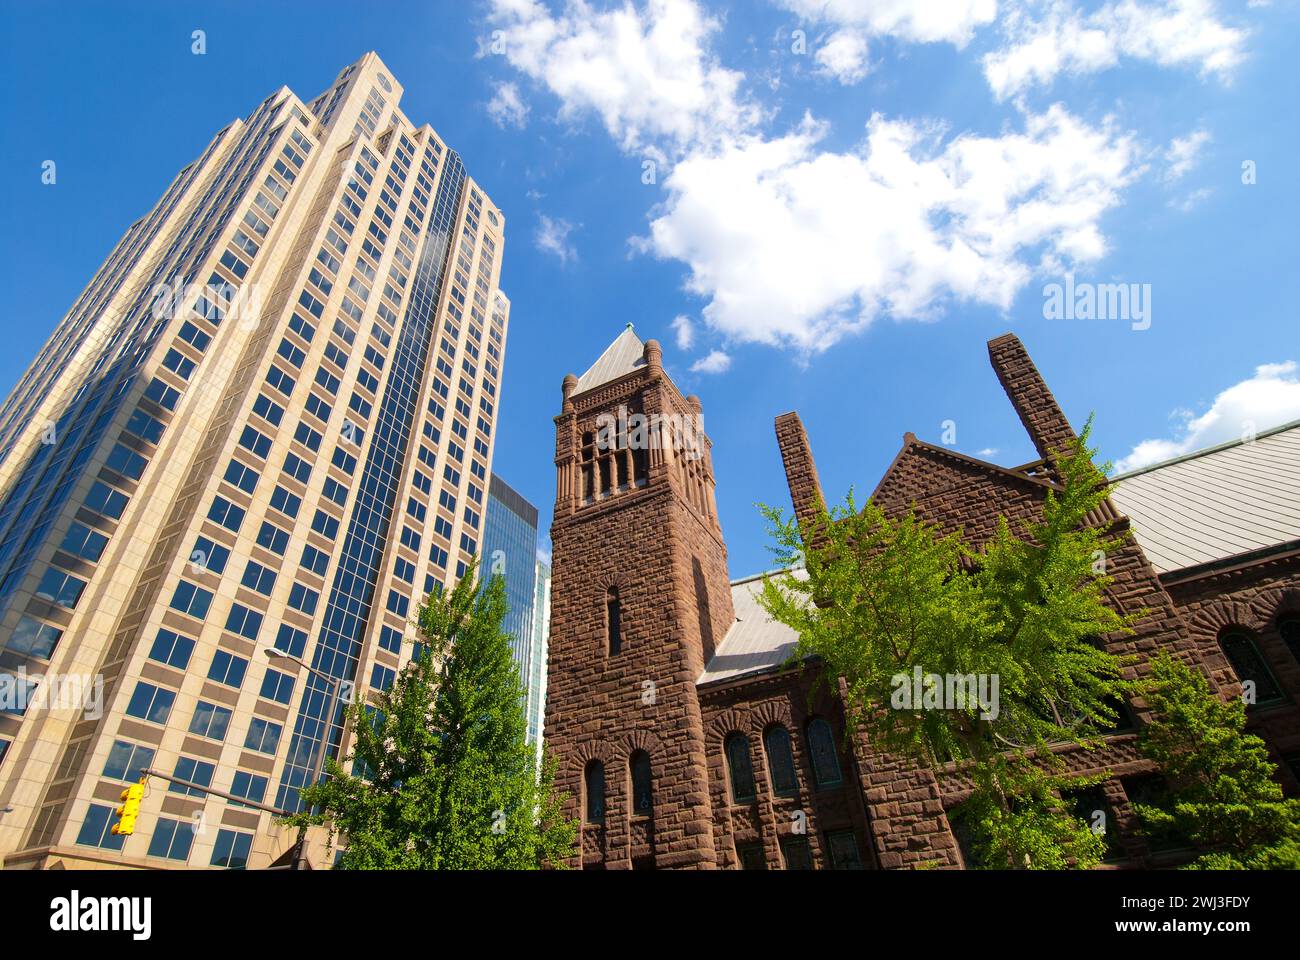 First United Methodist Church, built 1891, dwarfed by financial office towers in city center of Birmingham, Alabama - USA Stock Photo